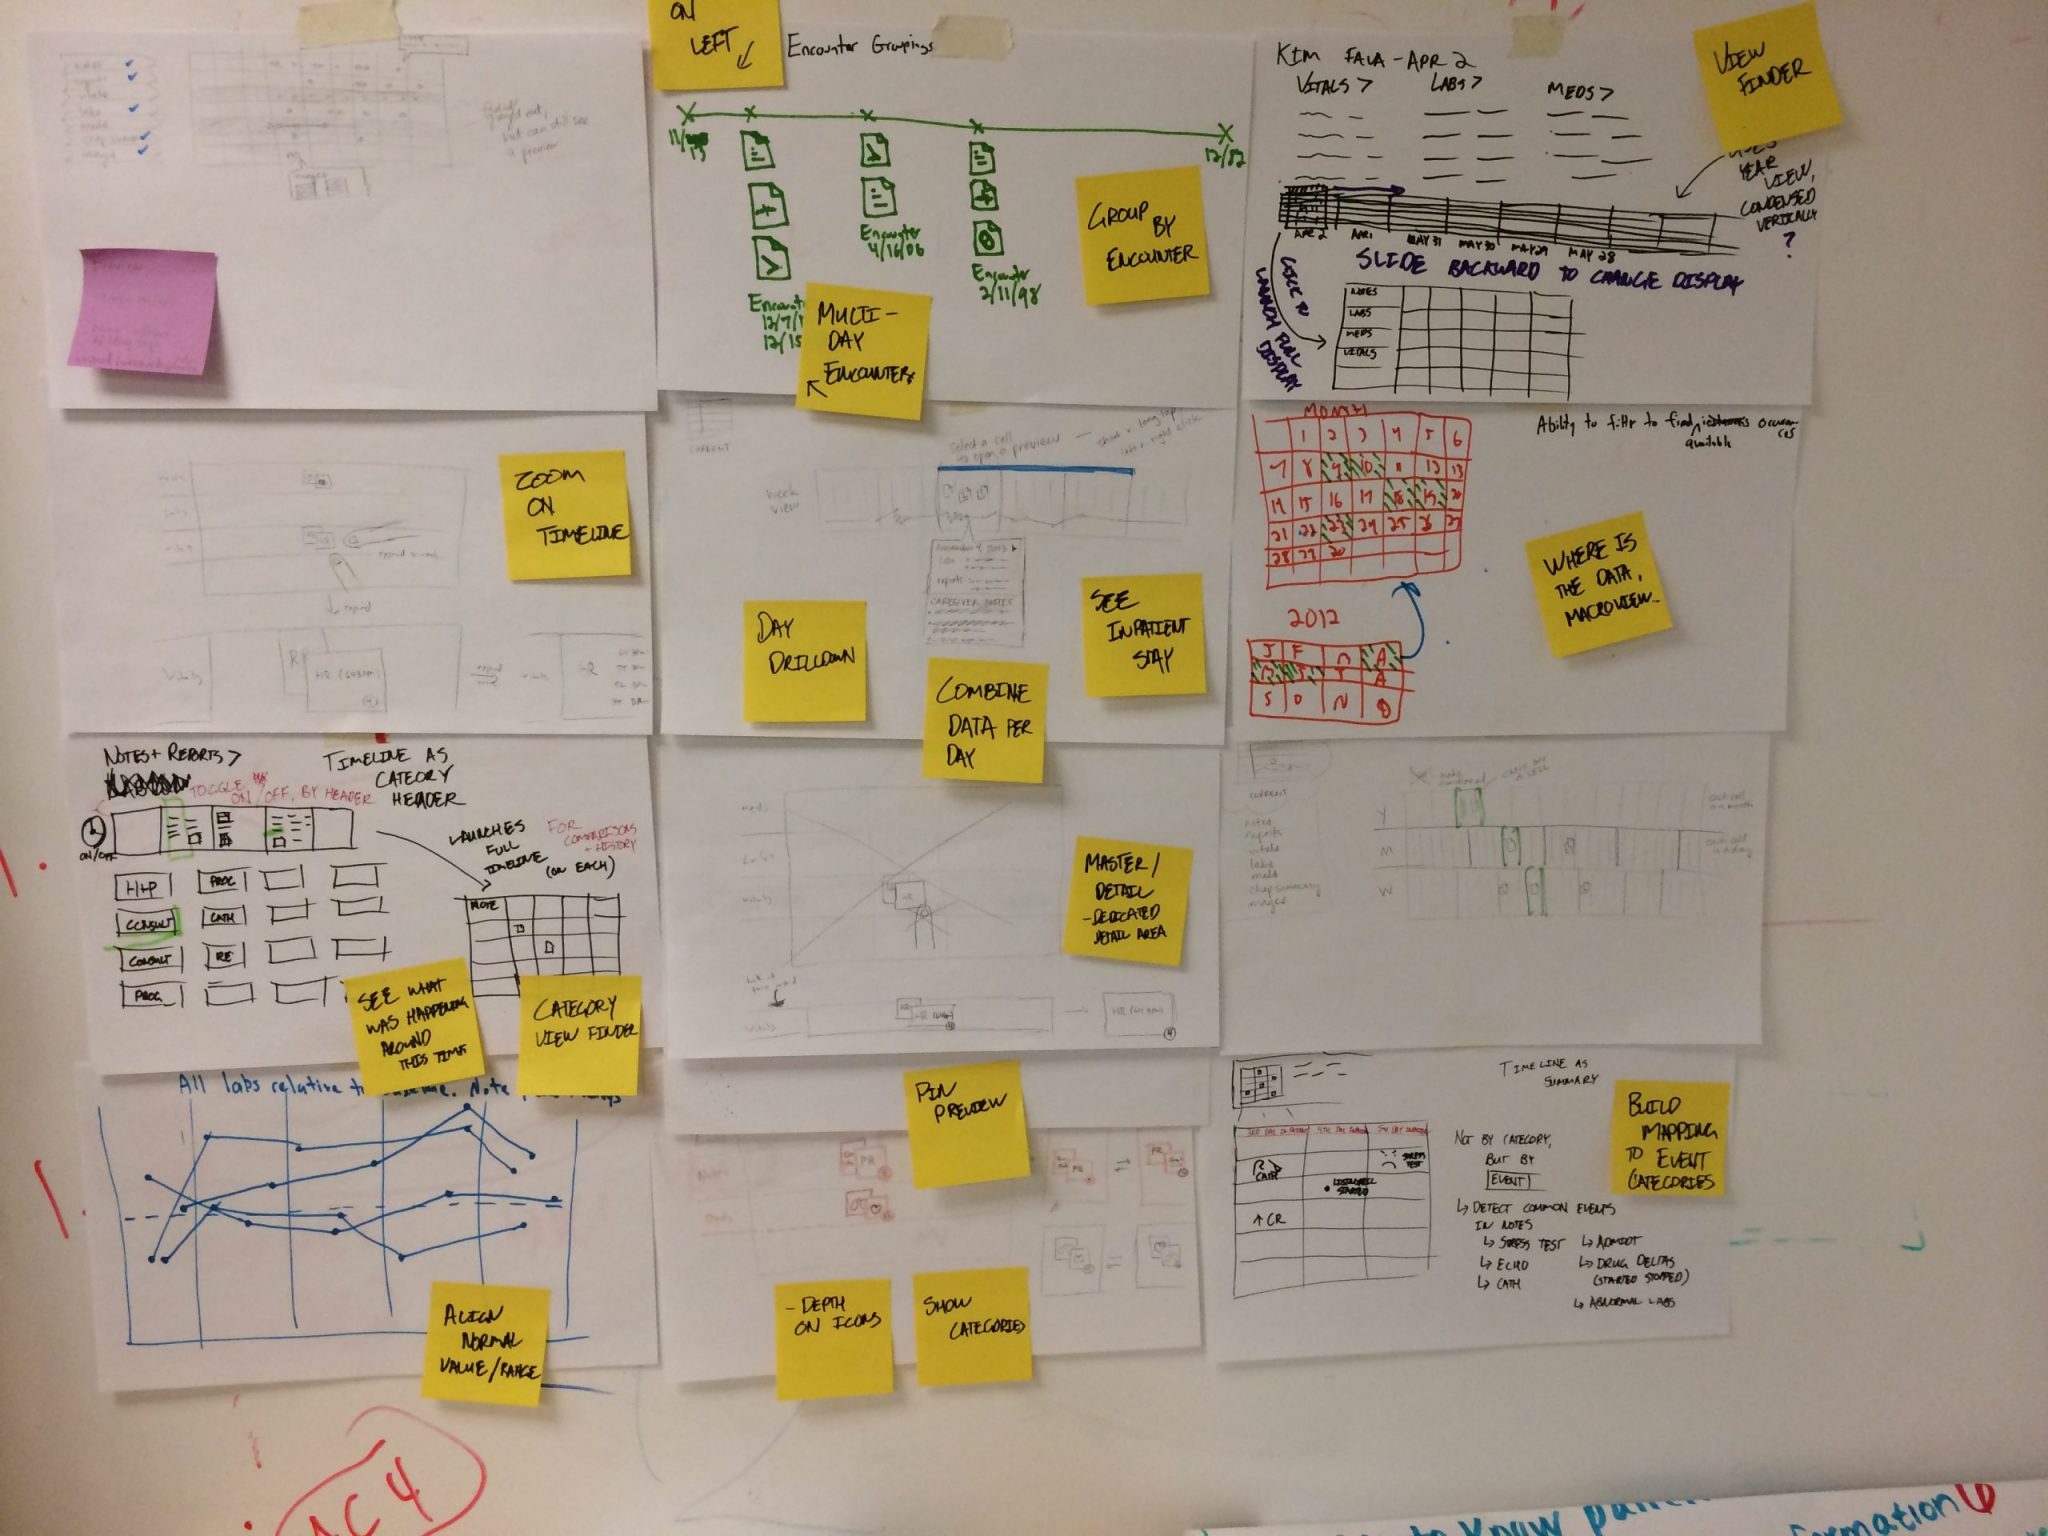 Sketches of timelines, charts, and grids on a wall, covered in sticky notes. They're the results of several quick rounds of brainstorming that I led our team in.